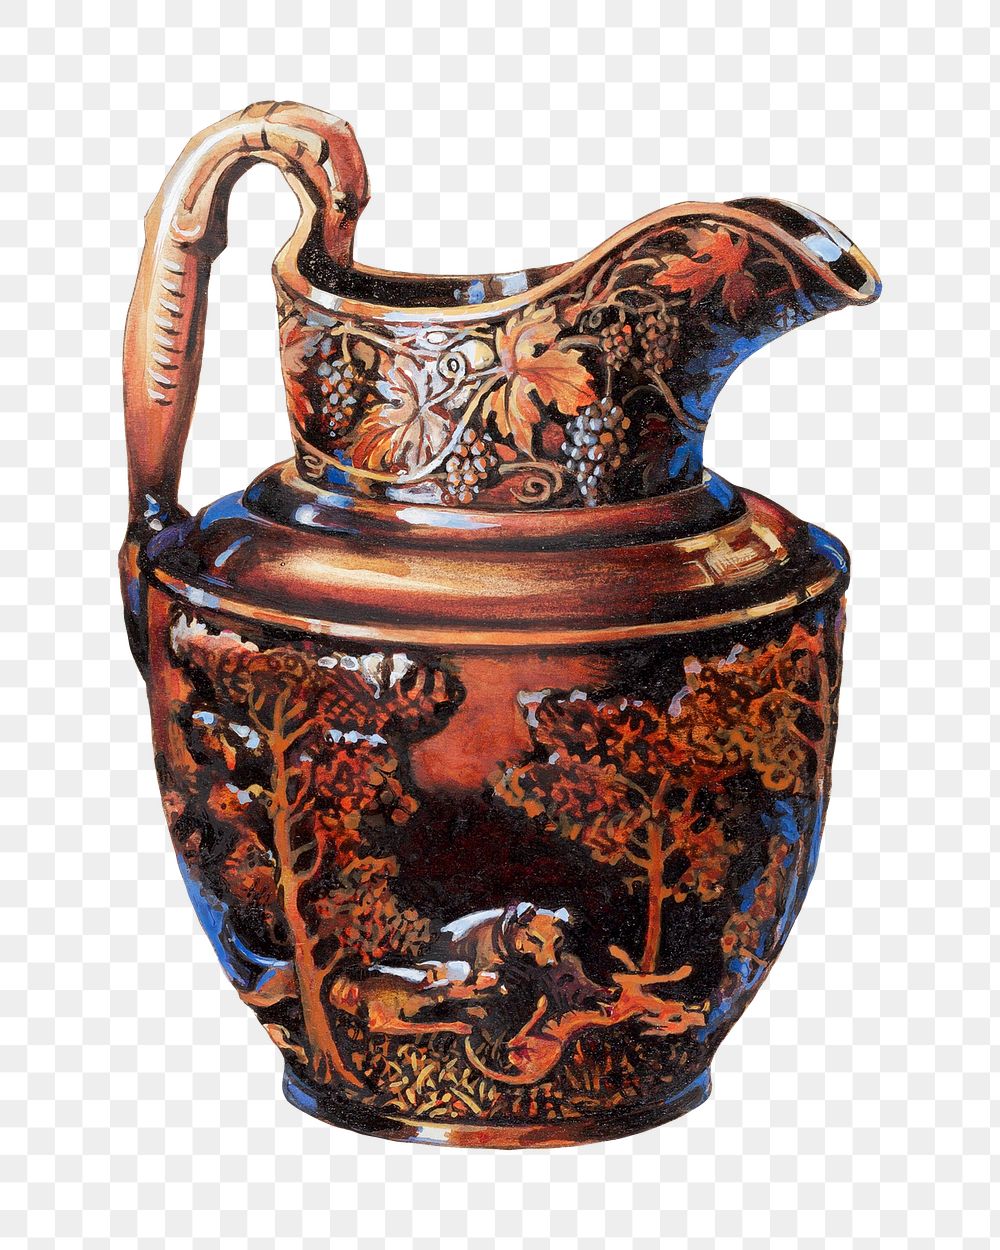 Vintage pitcher png illustration, remixed from the artwork by Charles Caseau